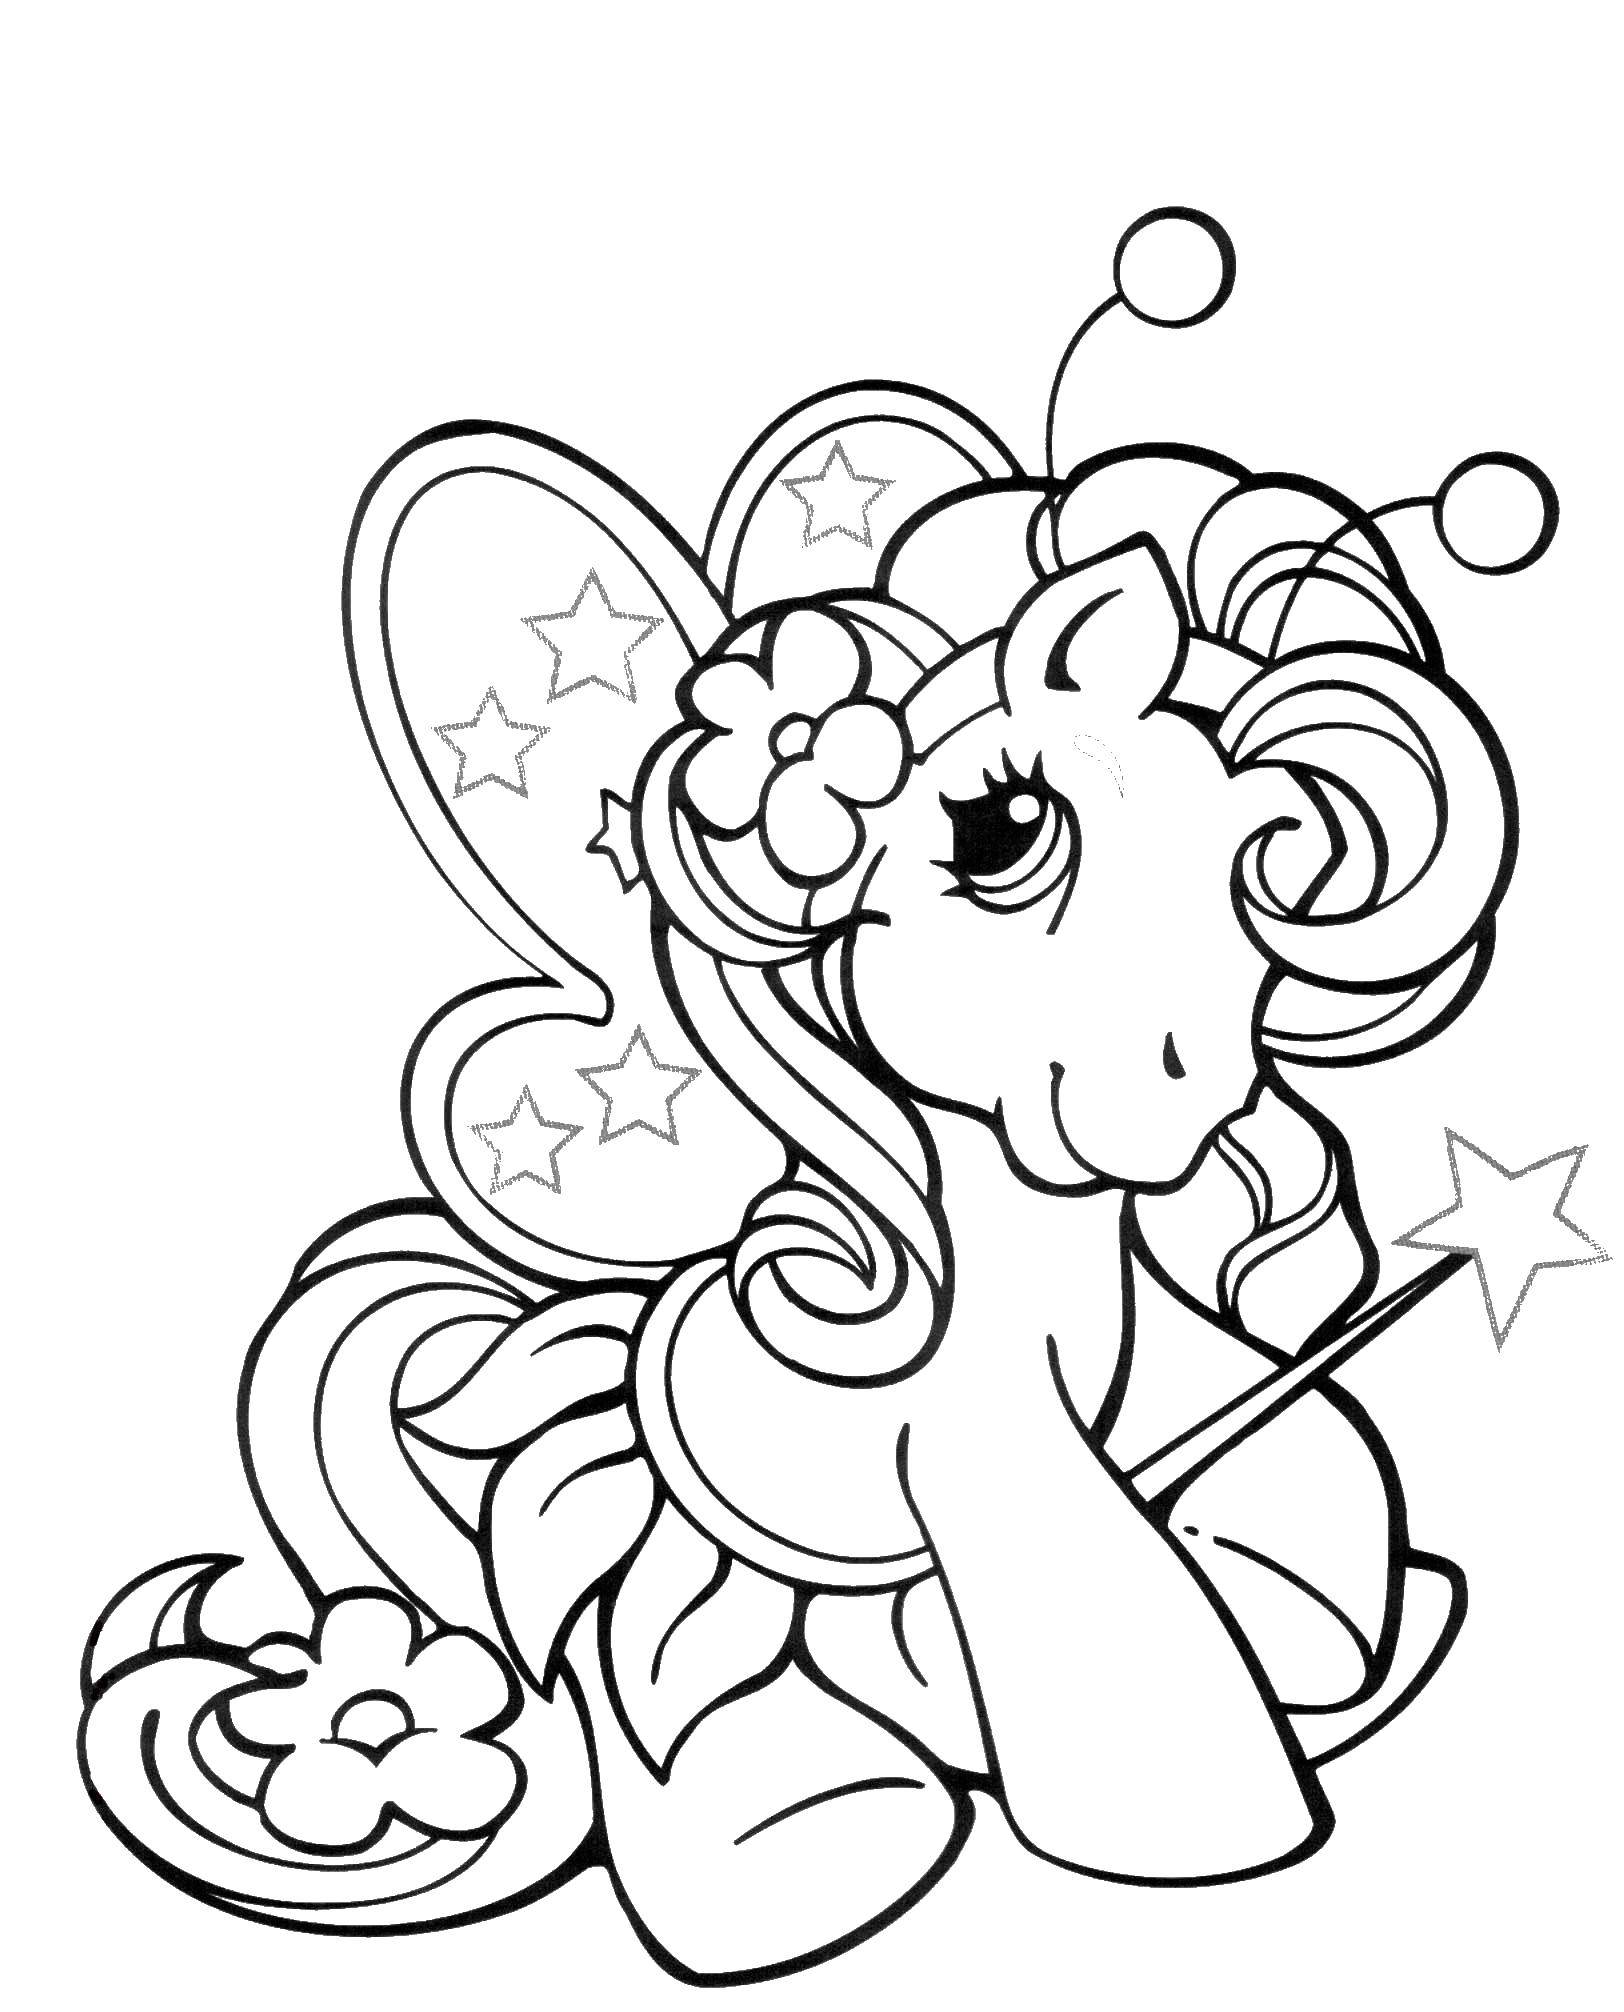 Coloring Pony butterfly. Category Ponies. Tags:  pony, unicorn.